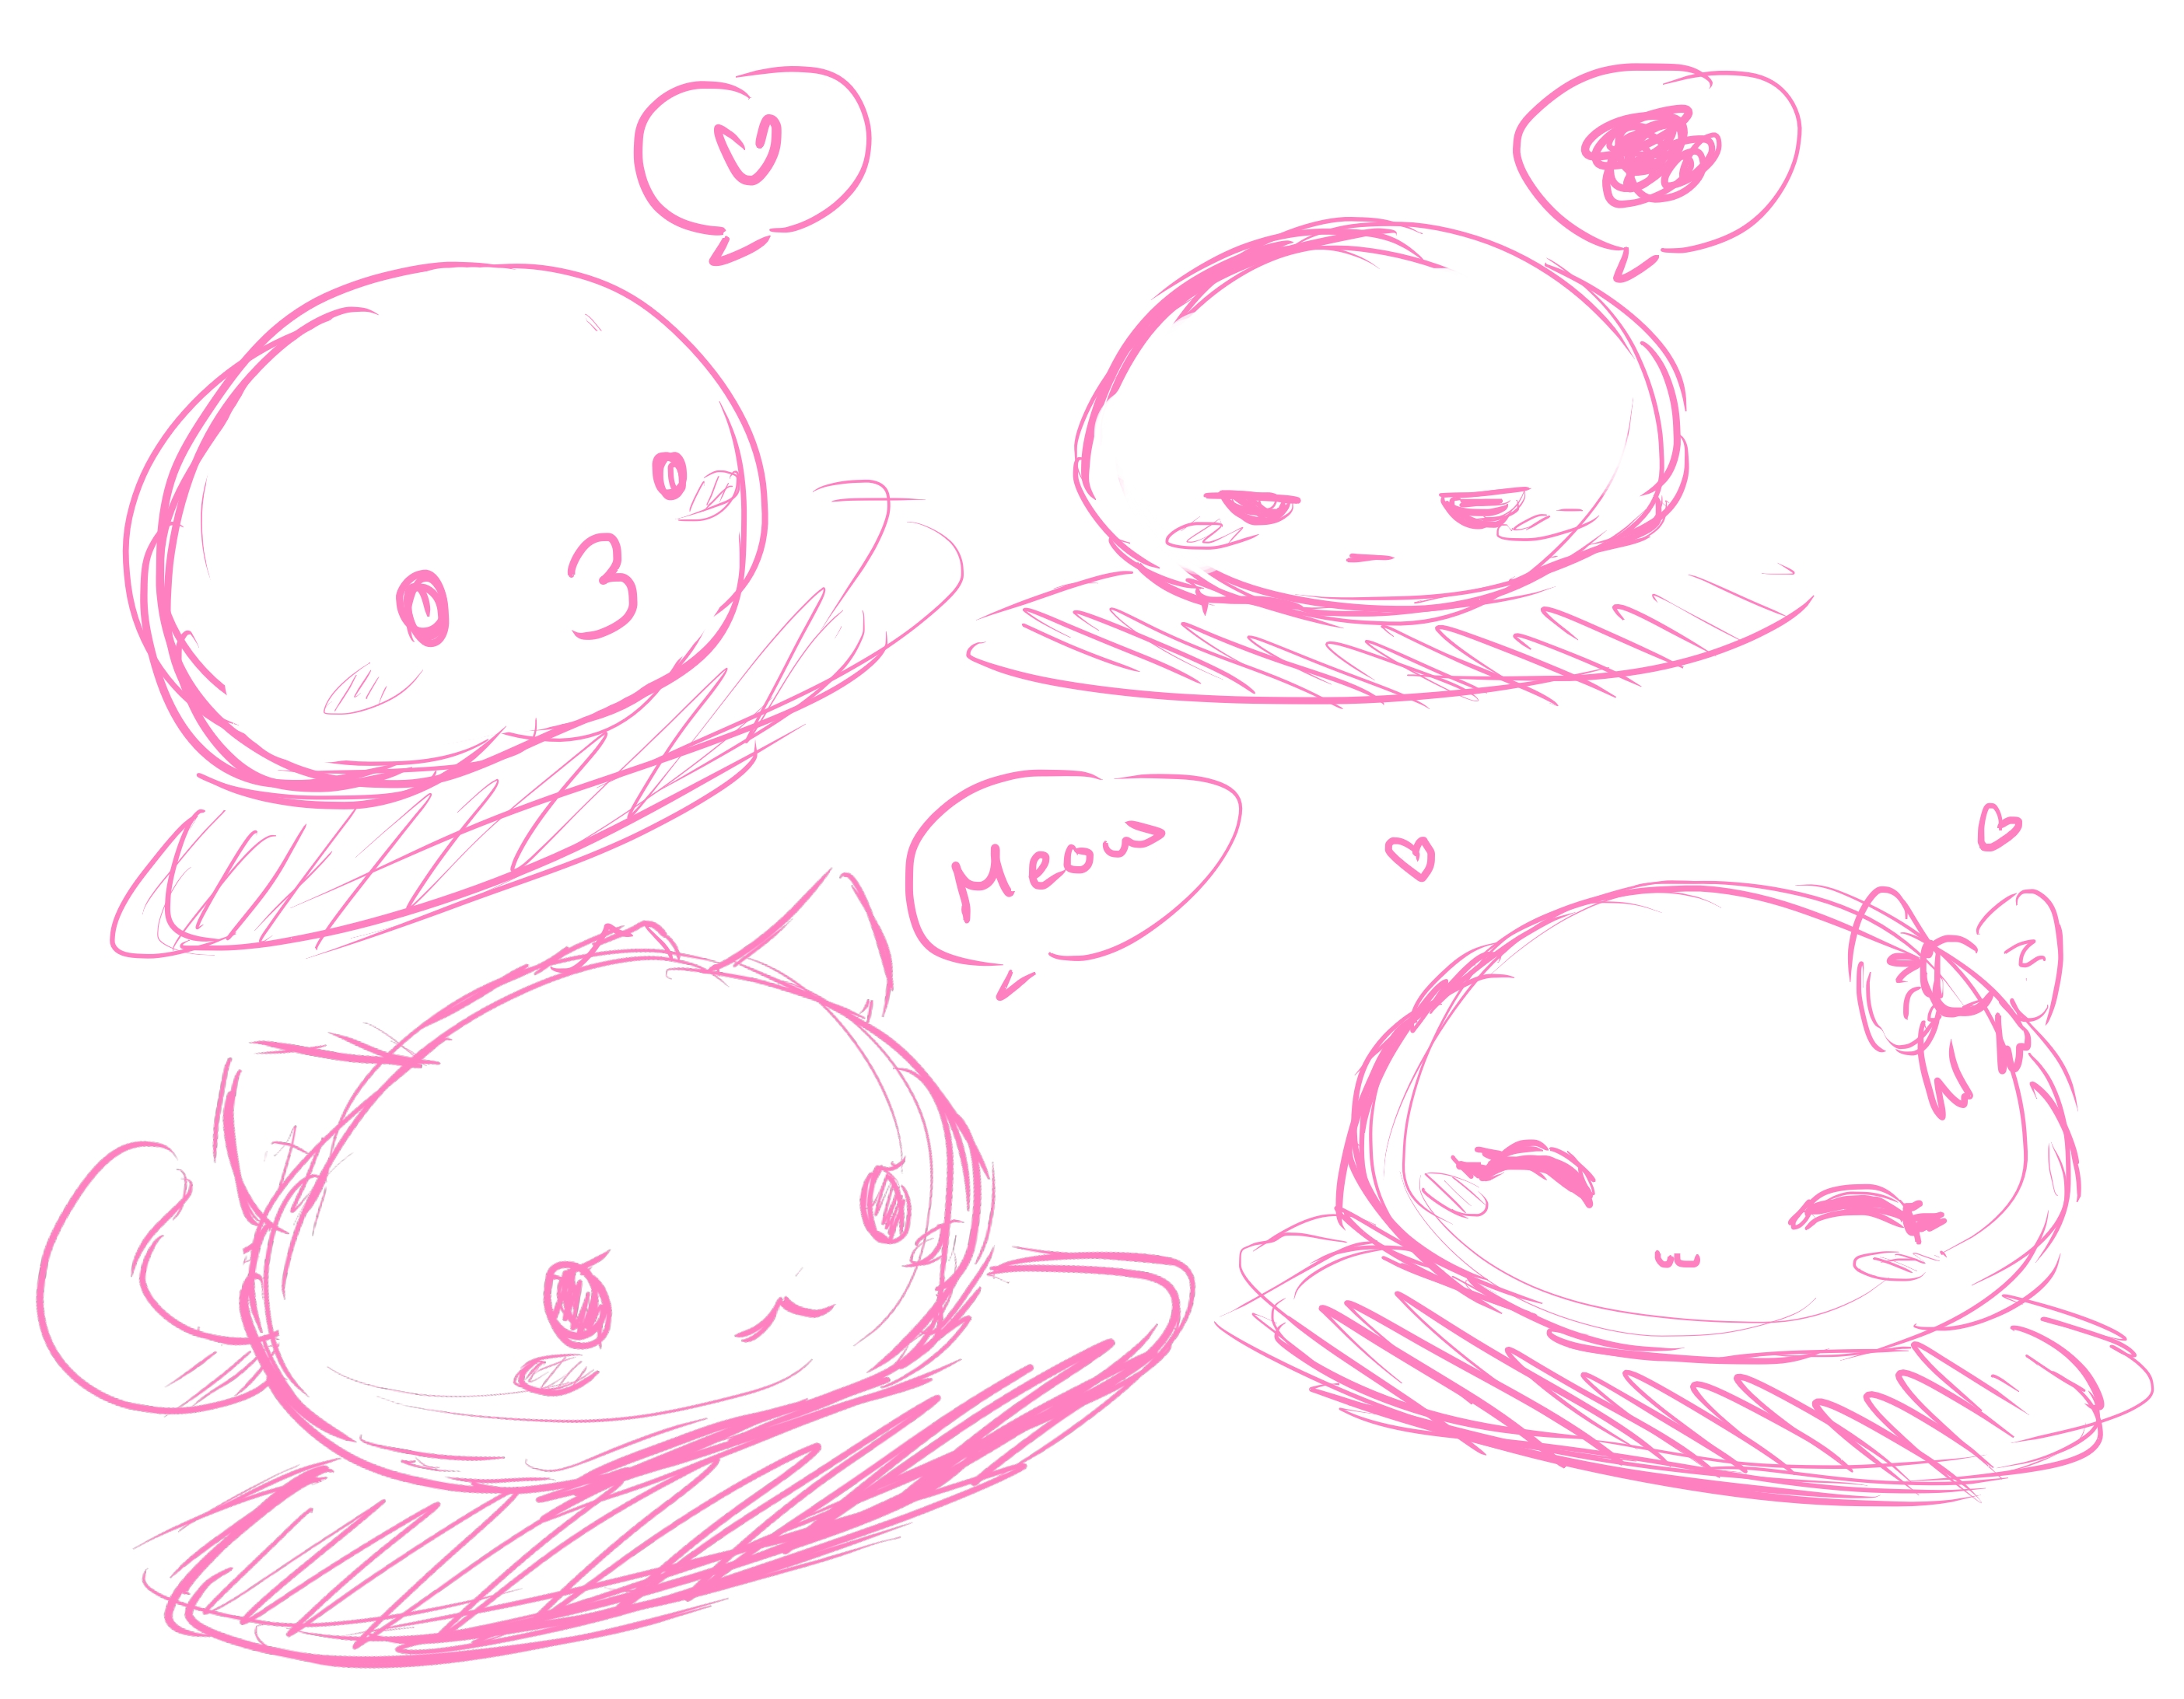 Slime Sketches